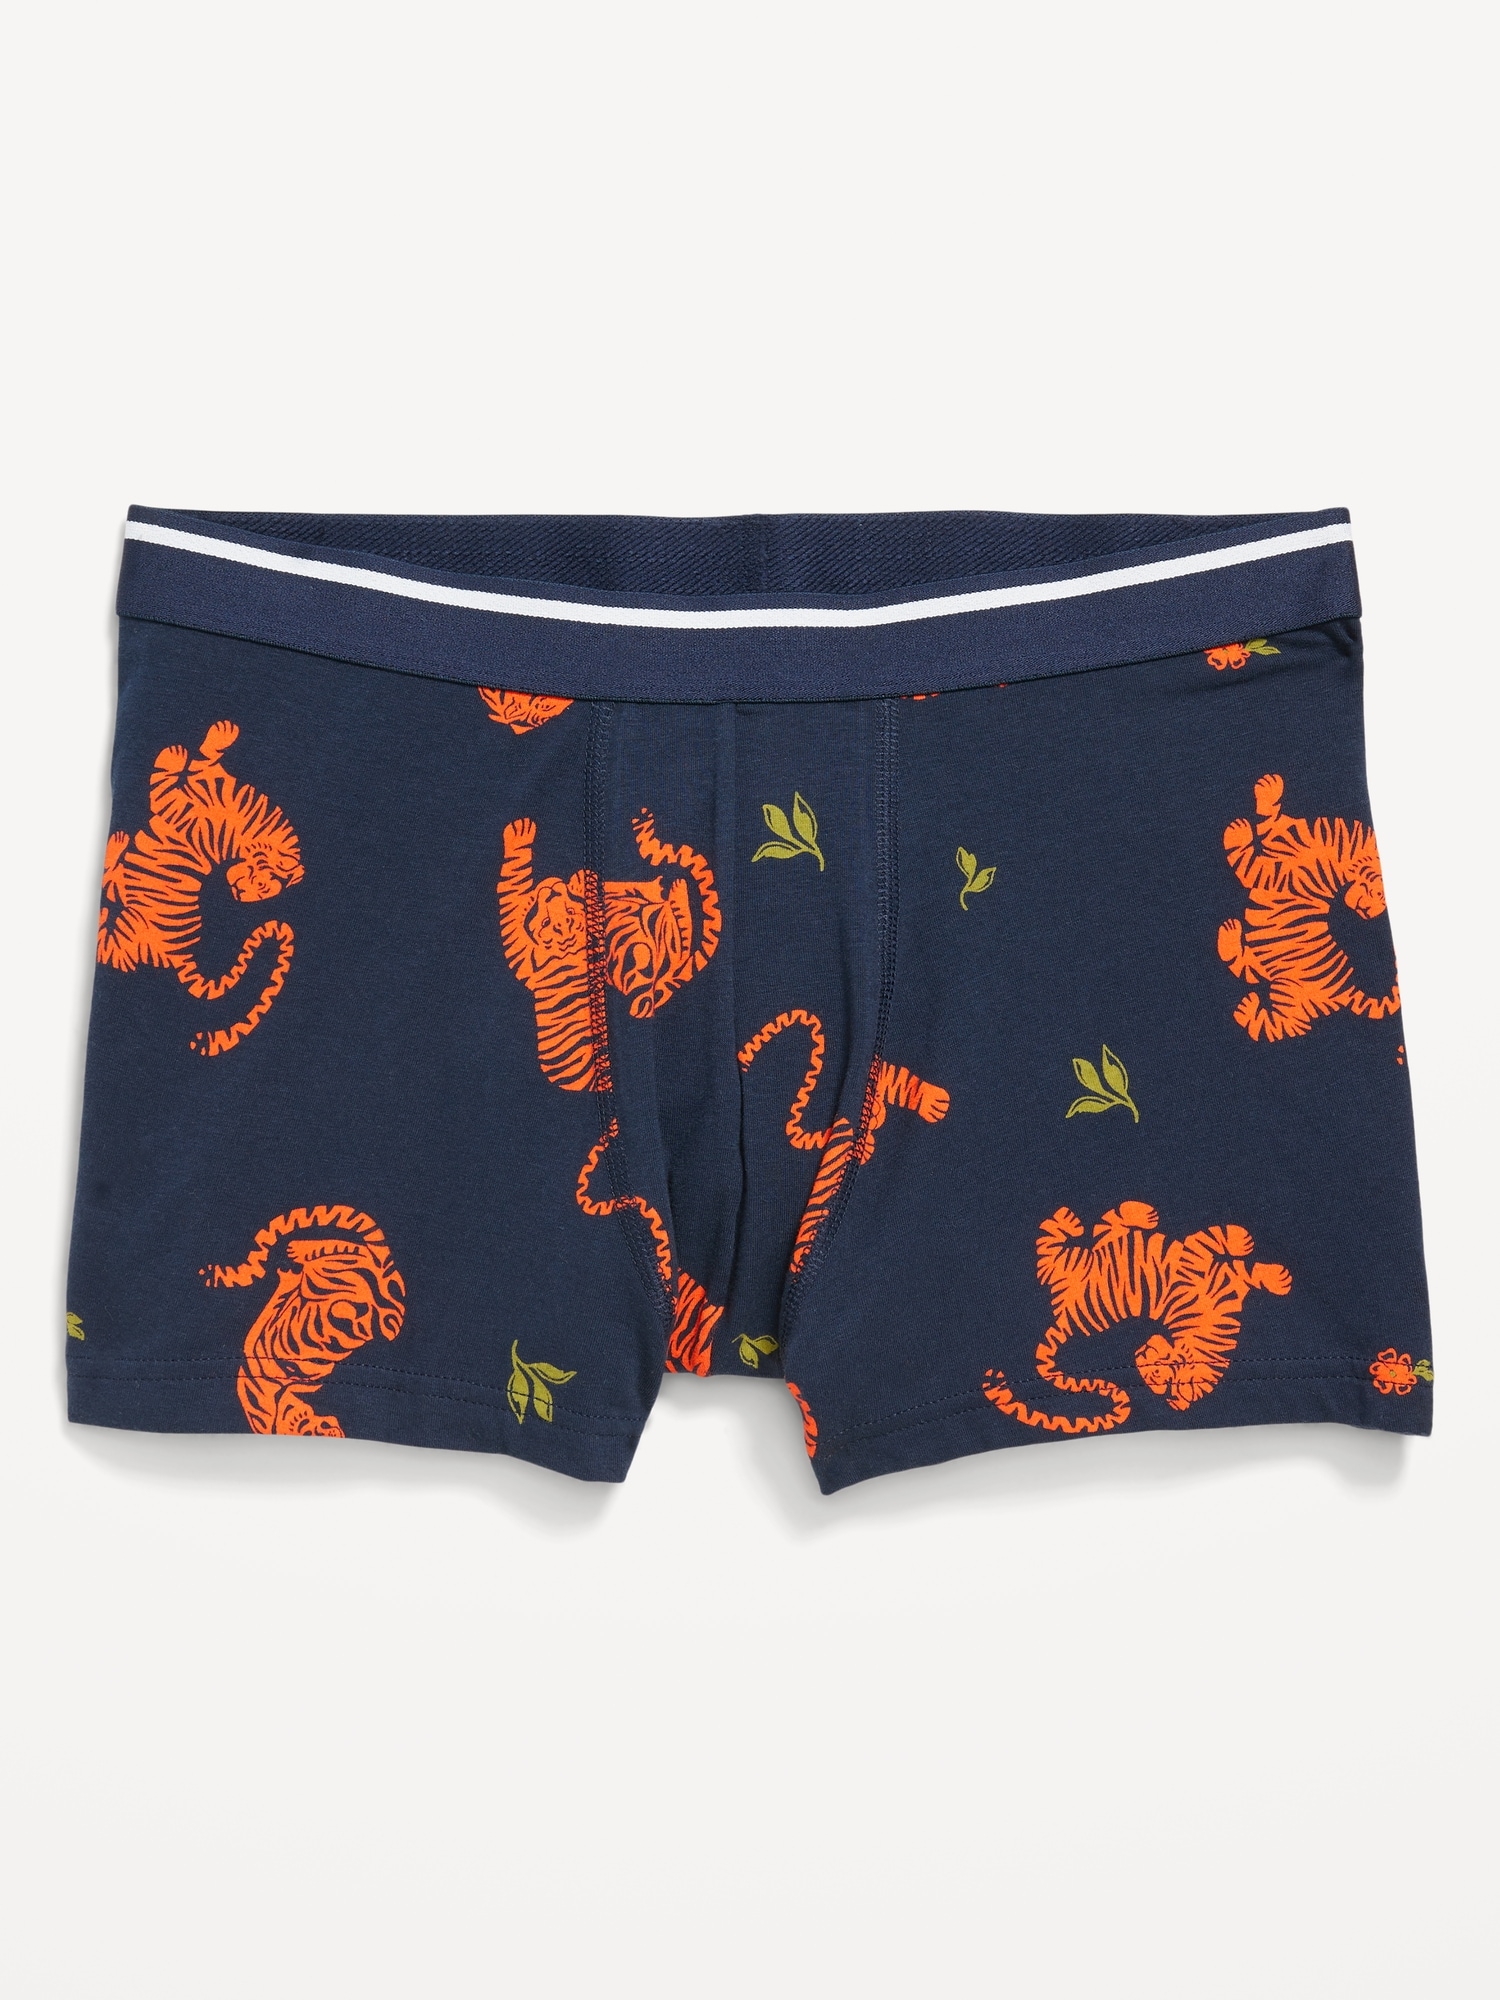 Soft-Washed Trunks -- 3-inch inseam